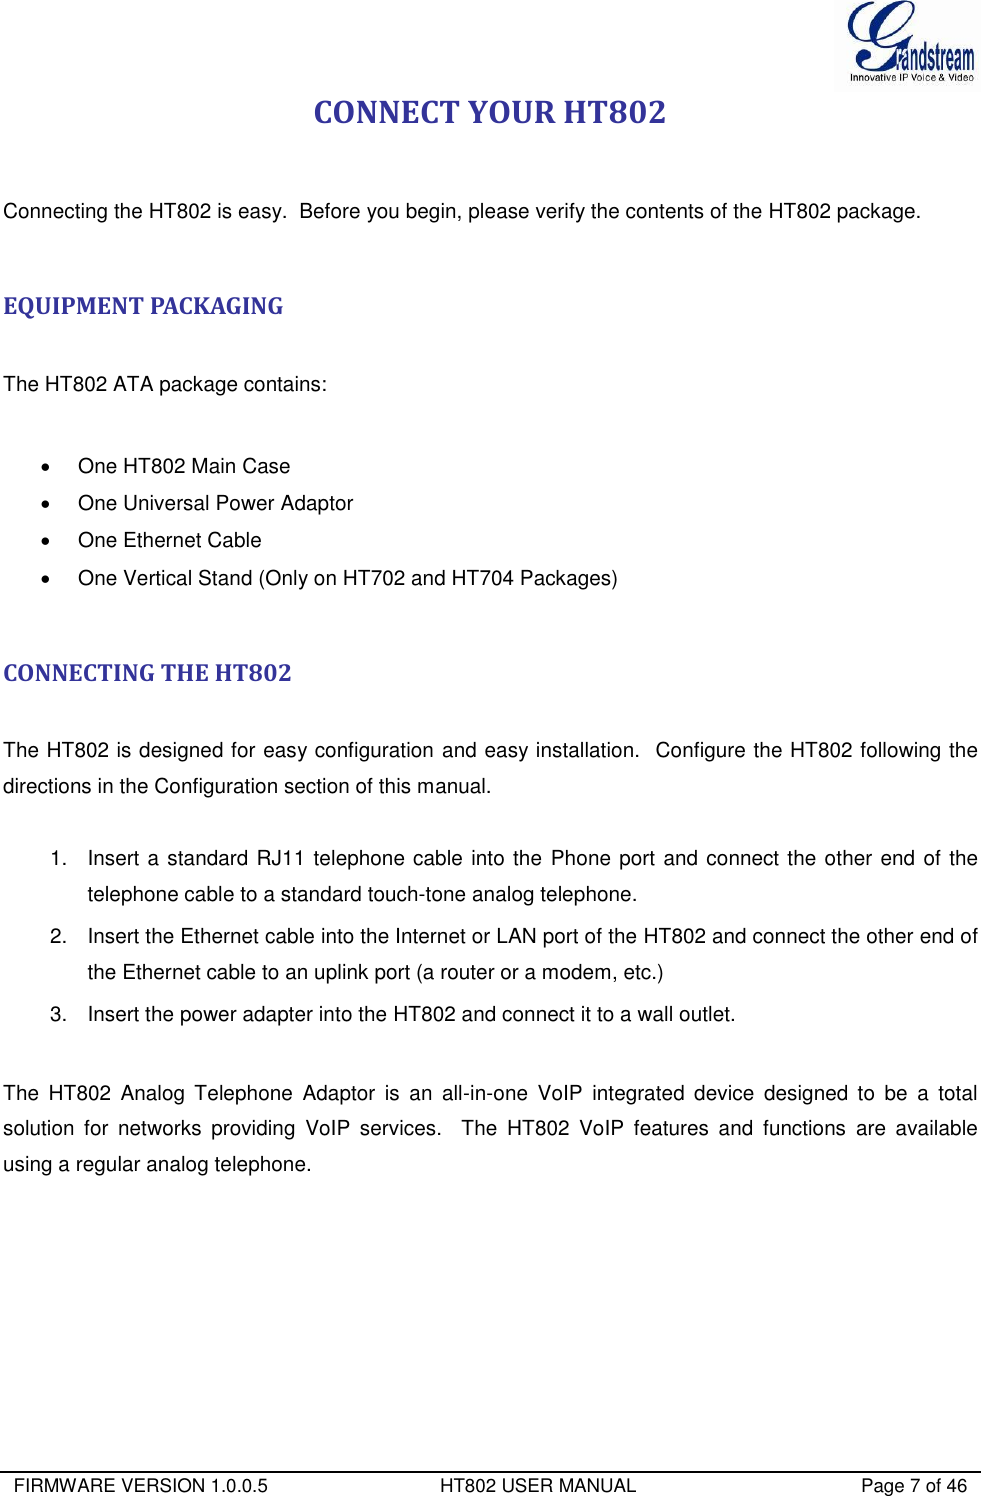  FIRMWARE VERSION 1.0.0.5                                 HT802 USER MANUAL                                           Page 7 of 46  CONNECT YOUR HT802  Connecting the HT802 is easy.  Before you begin, please verify the contents of the HT802 package.  EQUIPMENT PACKAGING  The HT802 ATA package contains:    One HT802 Main Case   One Universal Power Adaptor   One Ethernet Cable   One Vertical Stand (Only on HT702 and HT704 Packages)  CONNECTING THE HT802  The HT802 is designed for easy configuration and easy installation.  Configure the HT802 following the directions in the Configuration section of this manual.   1.  Insert a standard RJ11 telephone cable into the Phone port and connect the other end of the telephone cable to a standard touch-tone analog telephone. 2.  Insert the Ethernet cable into the Internet or LAN port of the HT802 and connect the other end of the Ethernet cable to an uplink port (a router or a modem, etc.) 3.  Insert the power adapter into the HT802 and connect it to a wall outlet.   The  HT802  Analog  Telephone  Adaptor  is  an  all-in-one  VoIP  integrated  device  designed  to  be  a  total solution  for  networks  providing  VoIP  services.    The  HT802  VoIP  features  and  functions  are  available using a regular analog telephone.             LAN Port   (RJ-45 connector 10/100 Mbps ) 